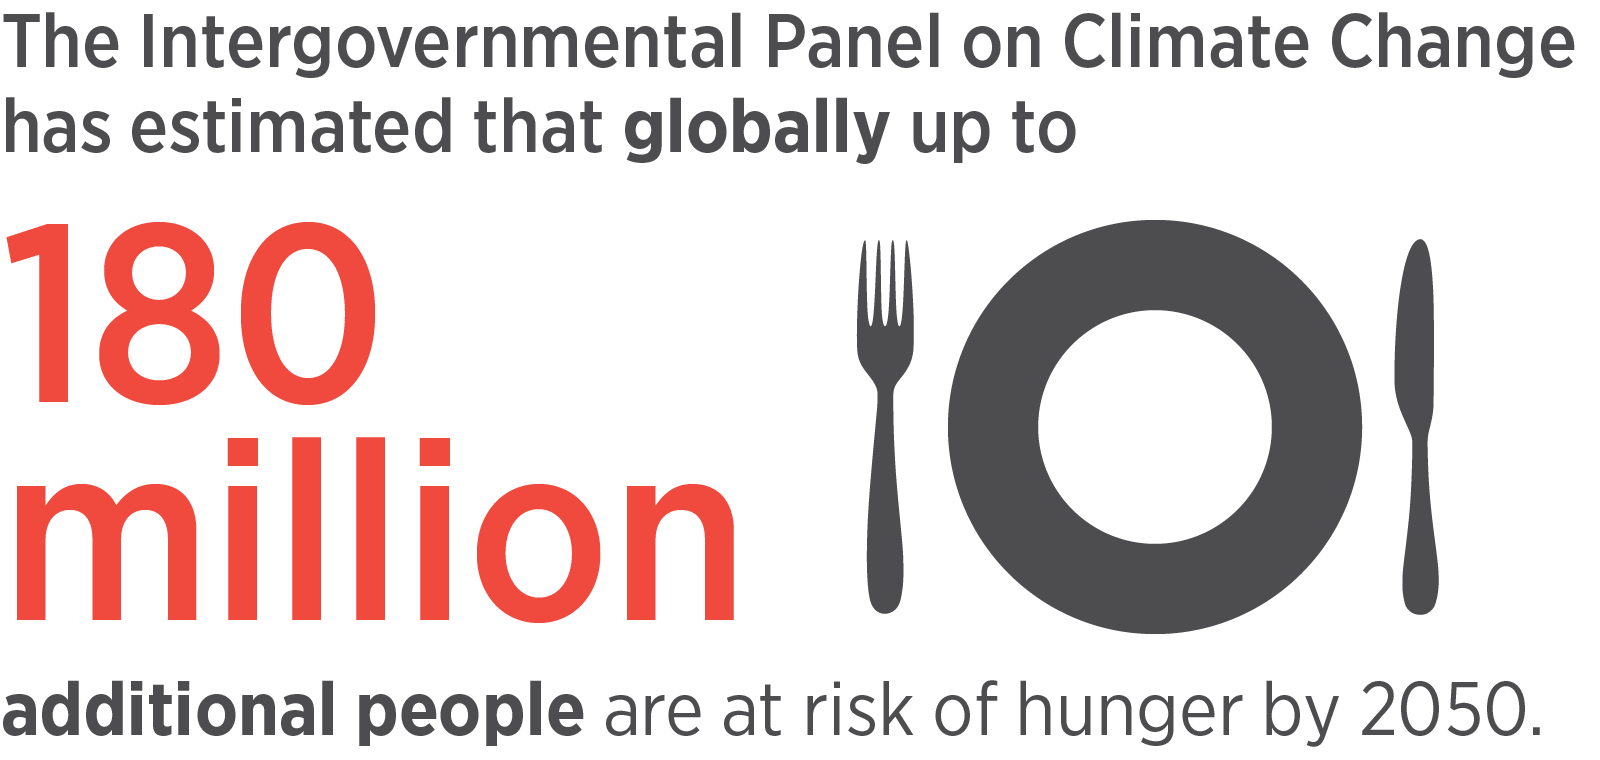 The Intergovernmental Panel on Climate Change has estimated that globally up to 180 million additional people are at risk of hunger by 2050.